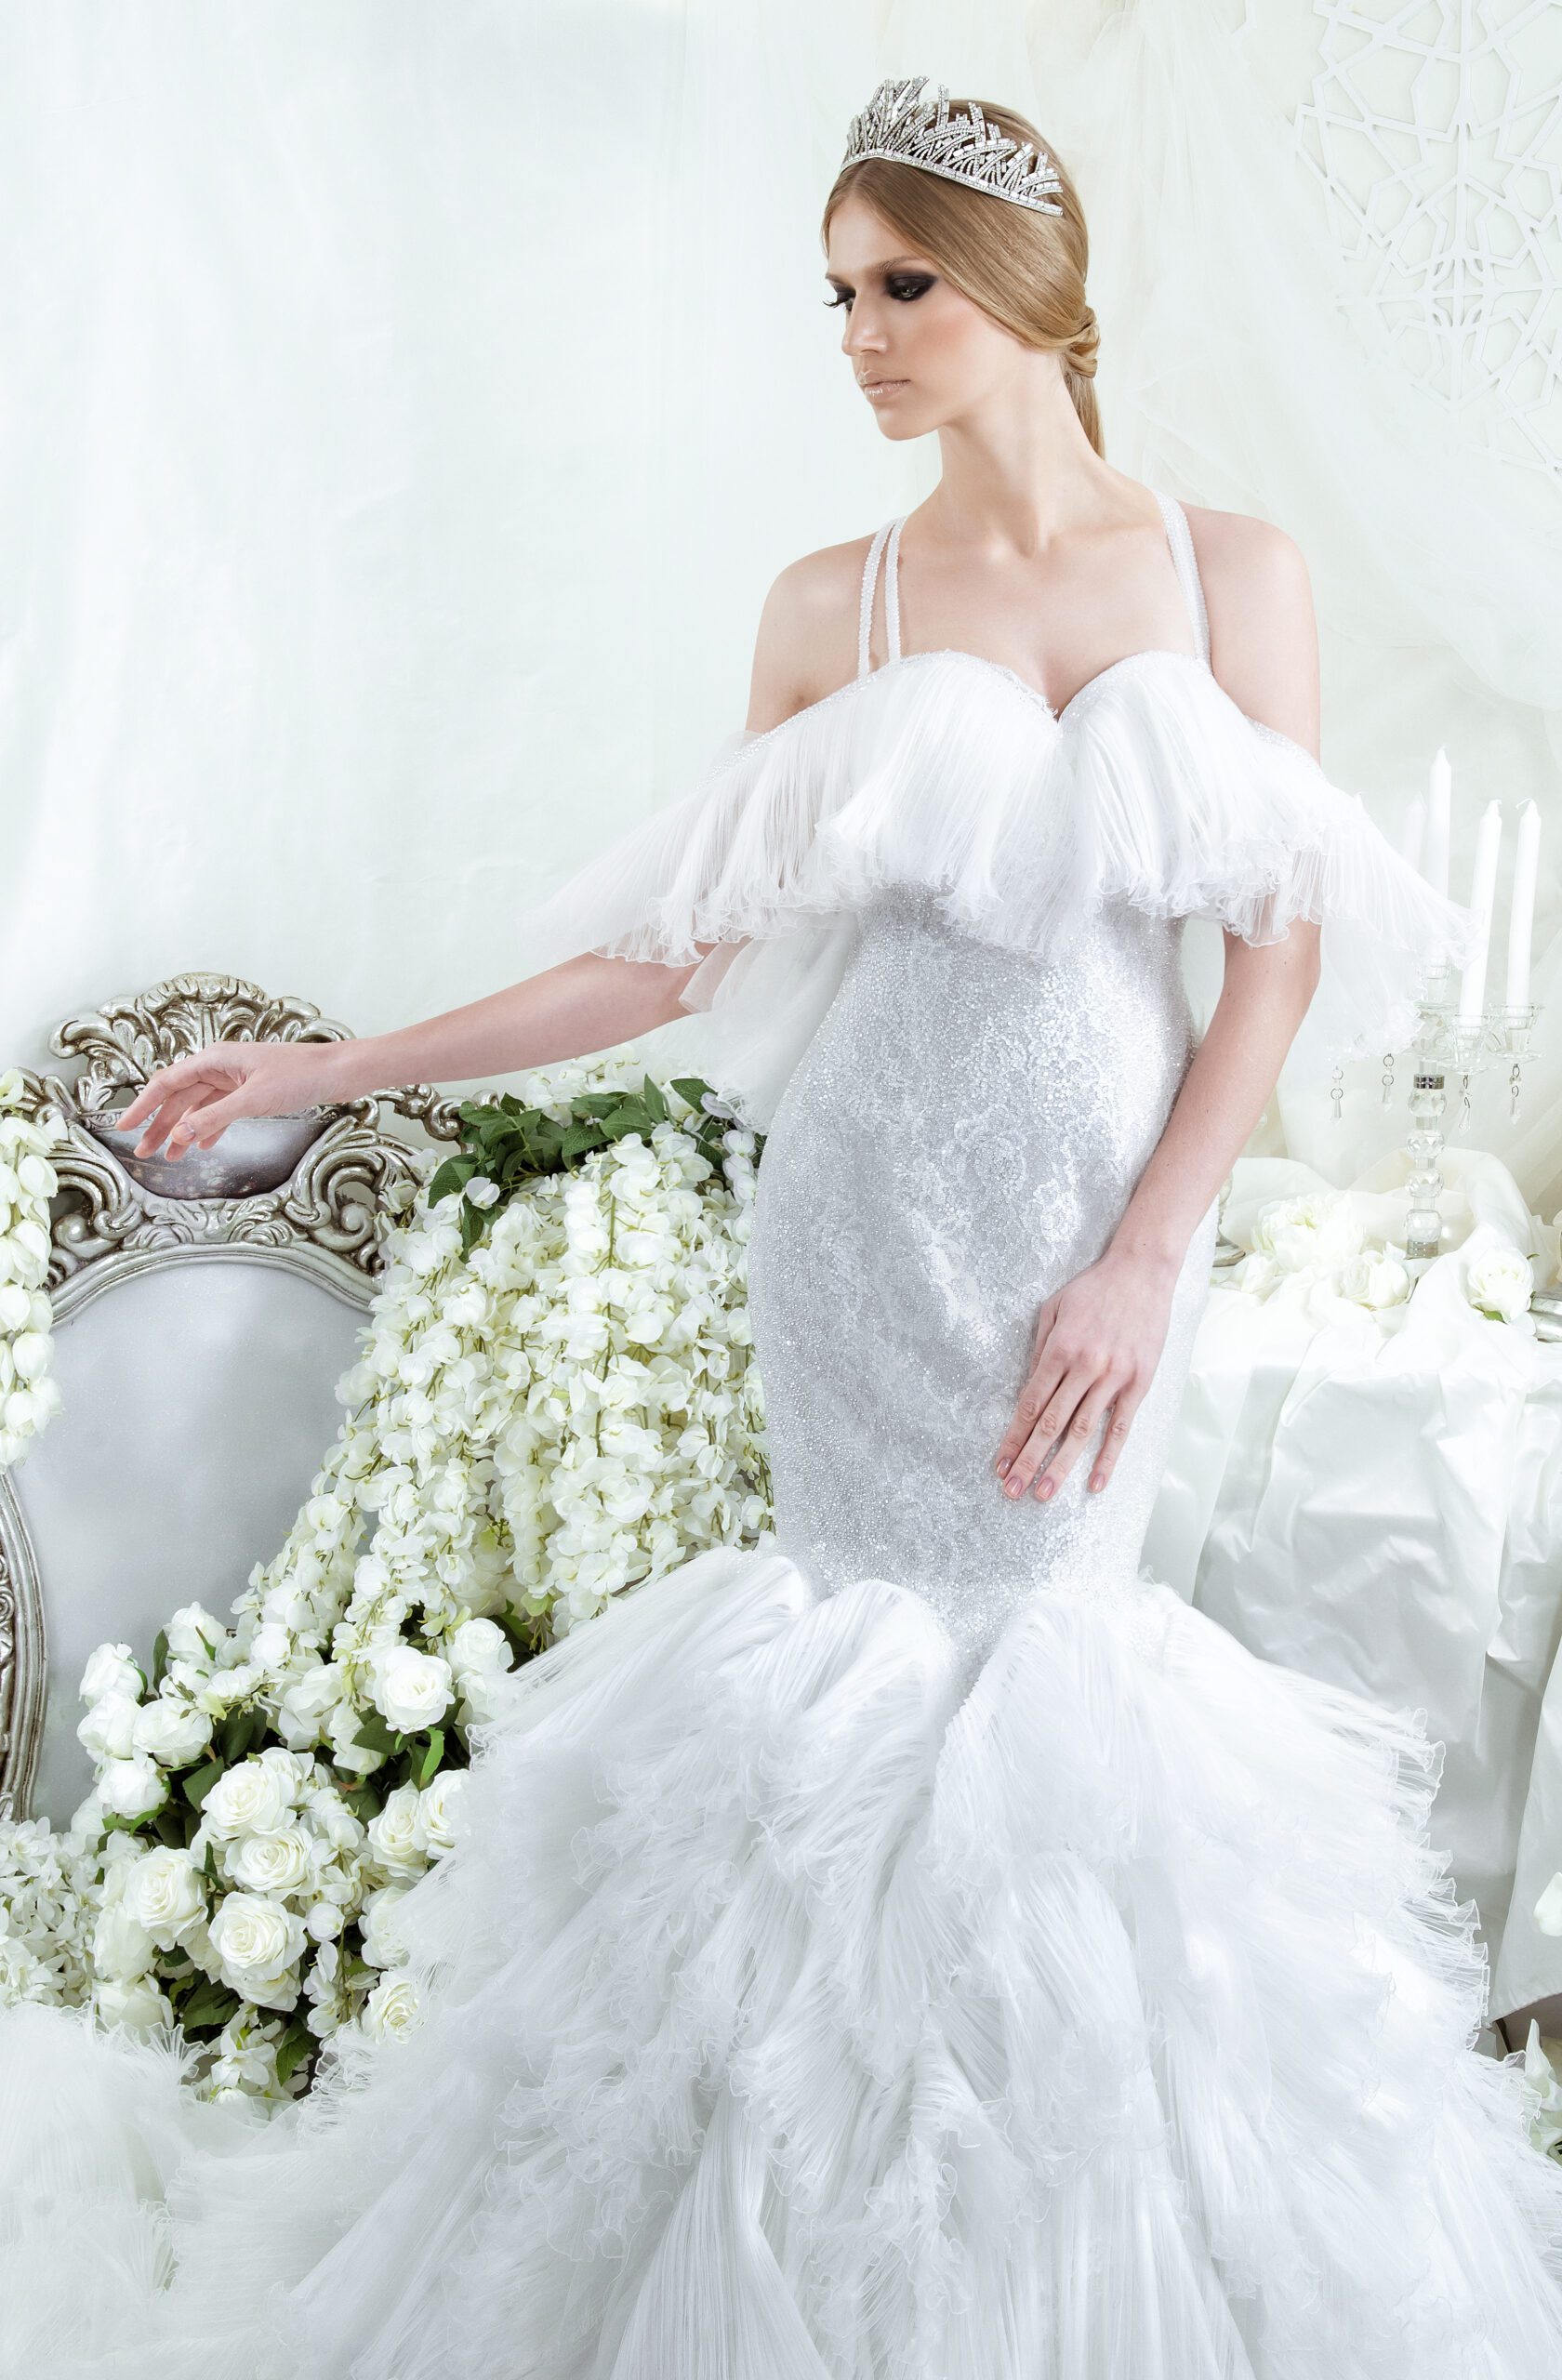 fashion atelier by darsara 1 3 scaled Stunning bridal and wedding dresses available for rental in Dubai, UAE